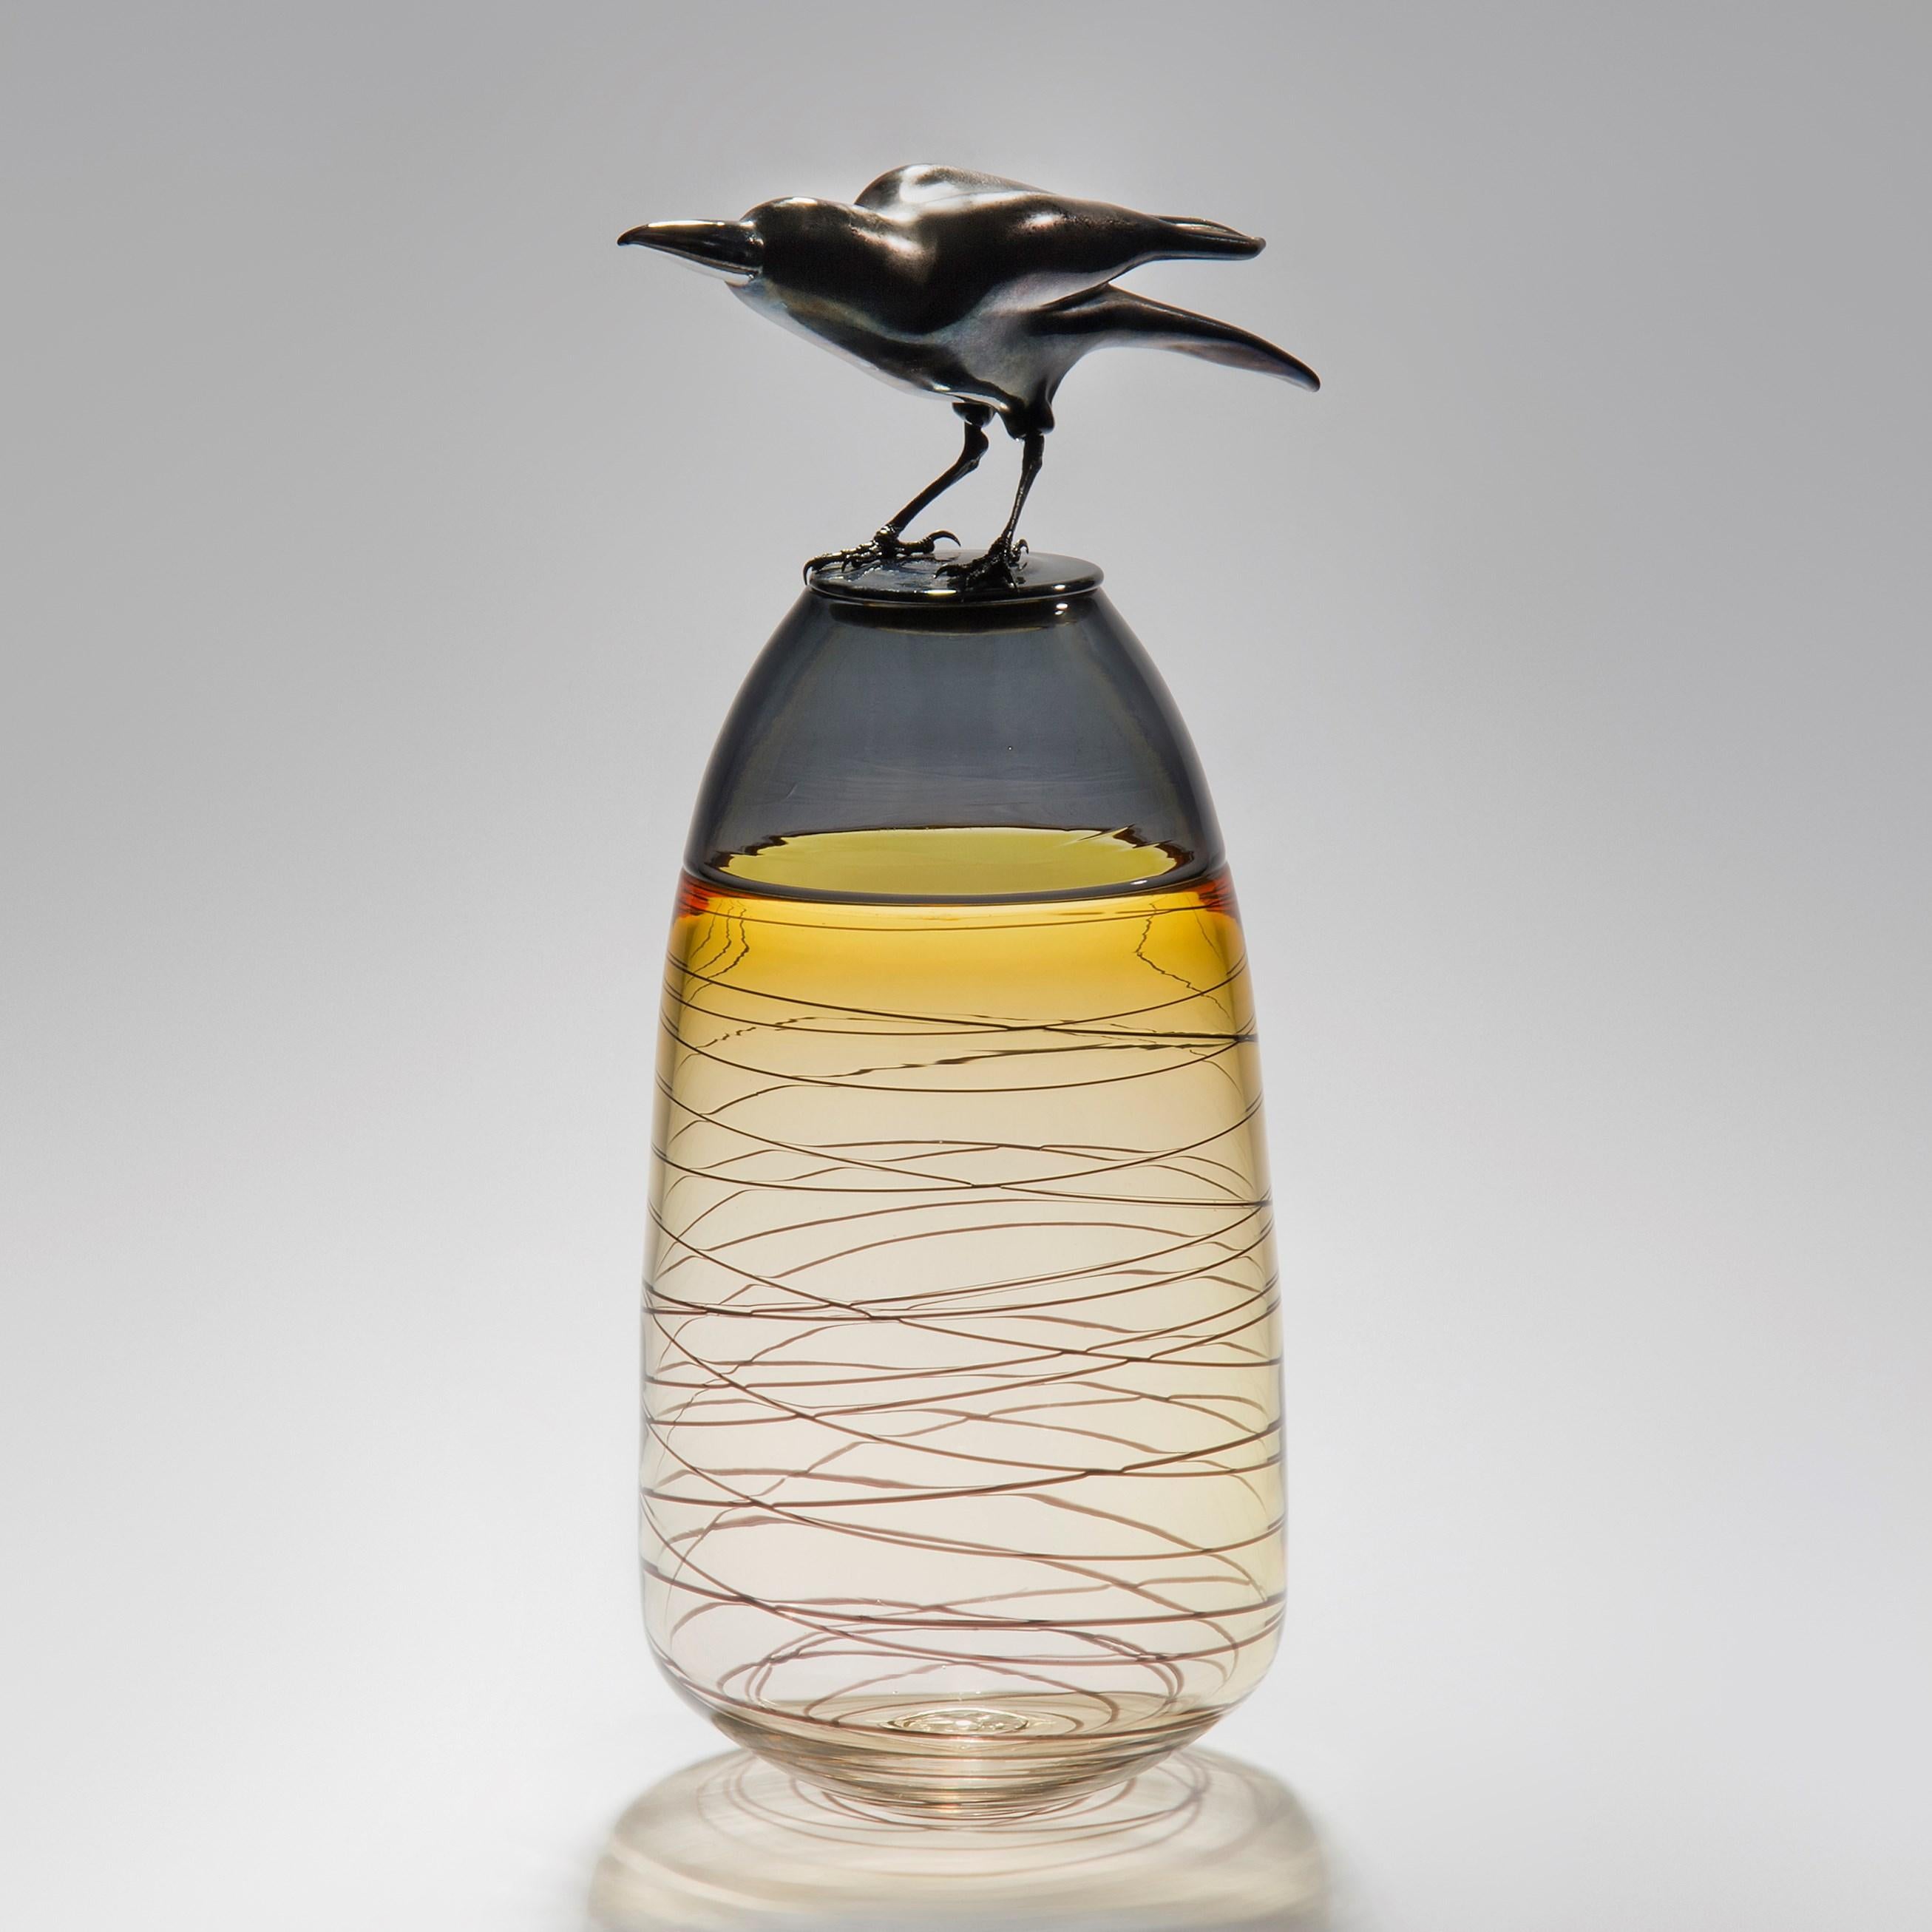 Take Off, is a handblown art glass vase in amber with removal lid adorned with a hot sculpted black glass crow by the British artist Julie Johnson. The crow figurine can also be lifted off with the main body leaving a functioning vase.

Following on